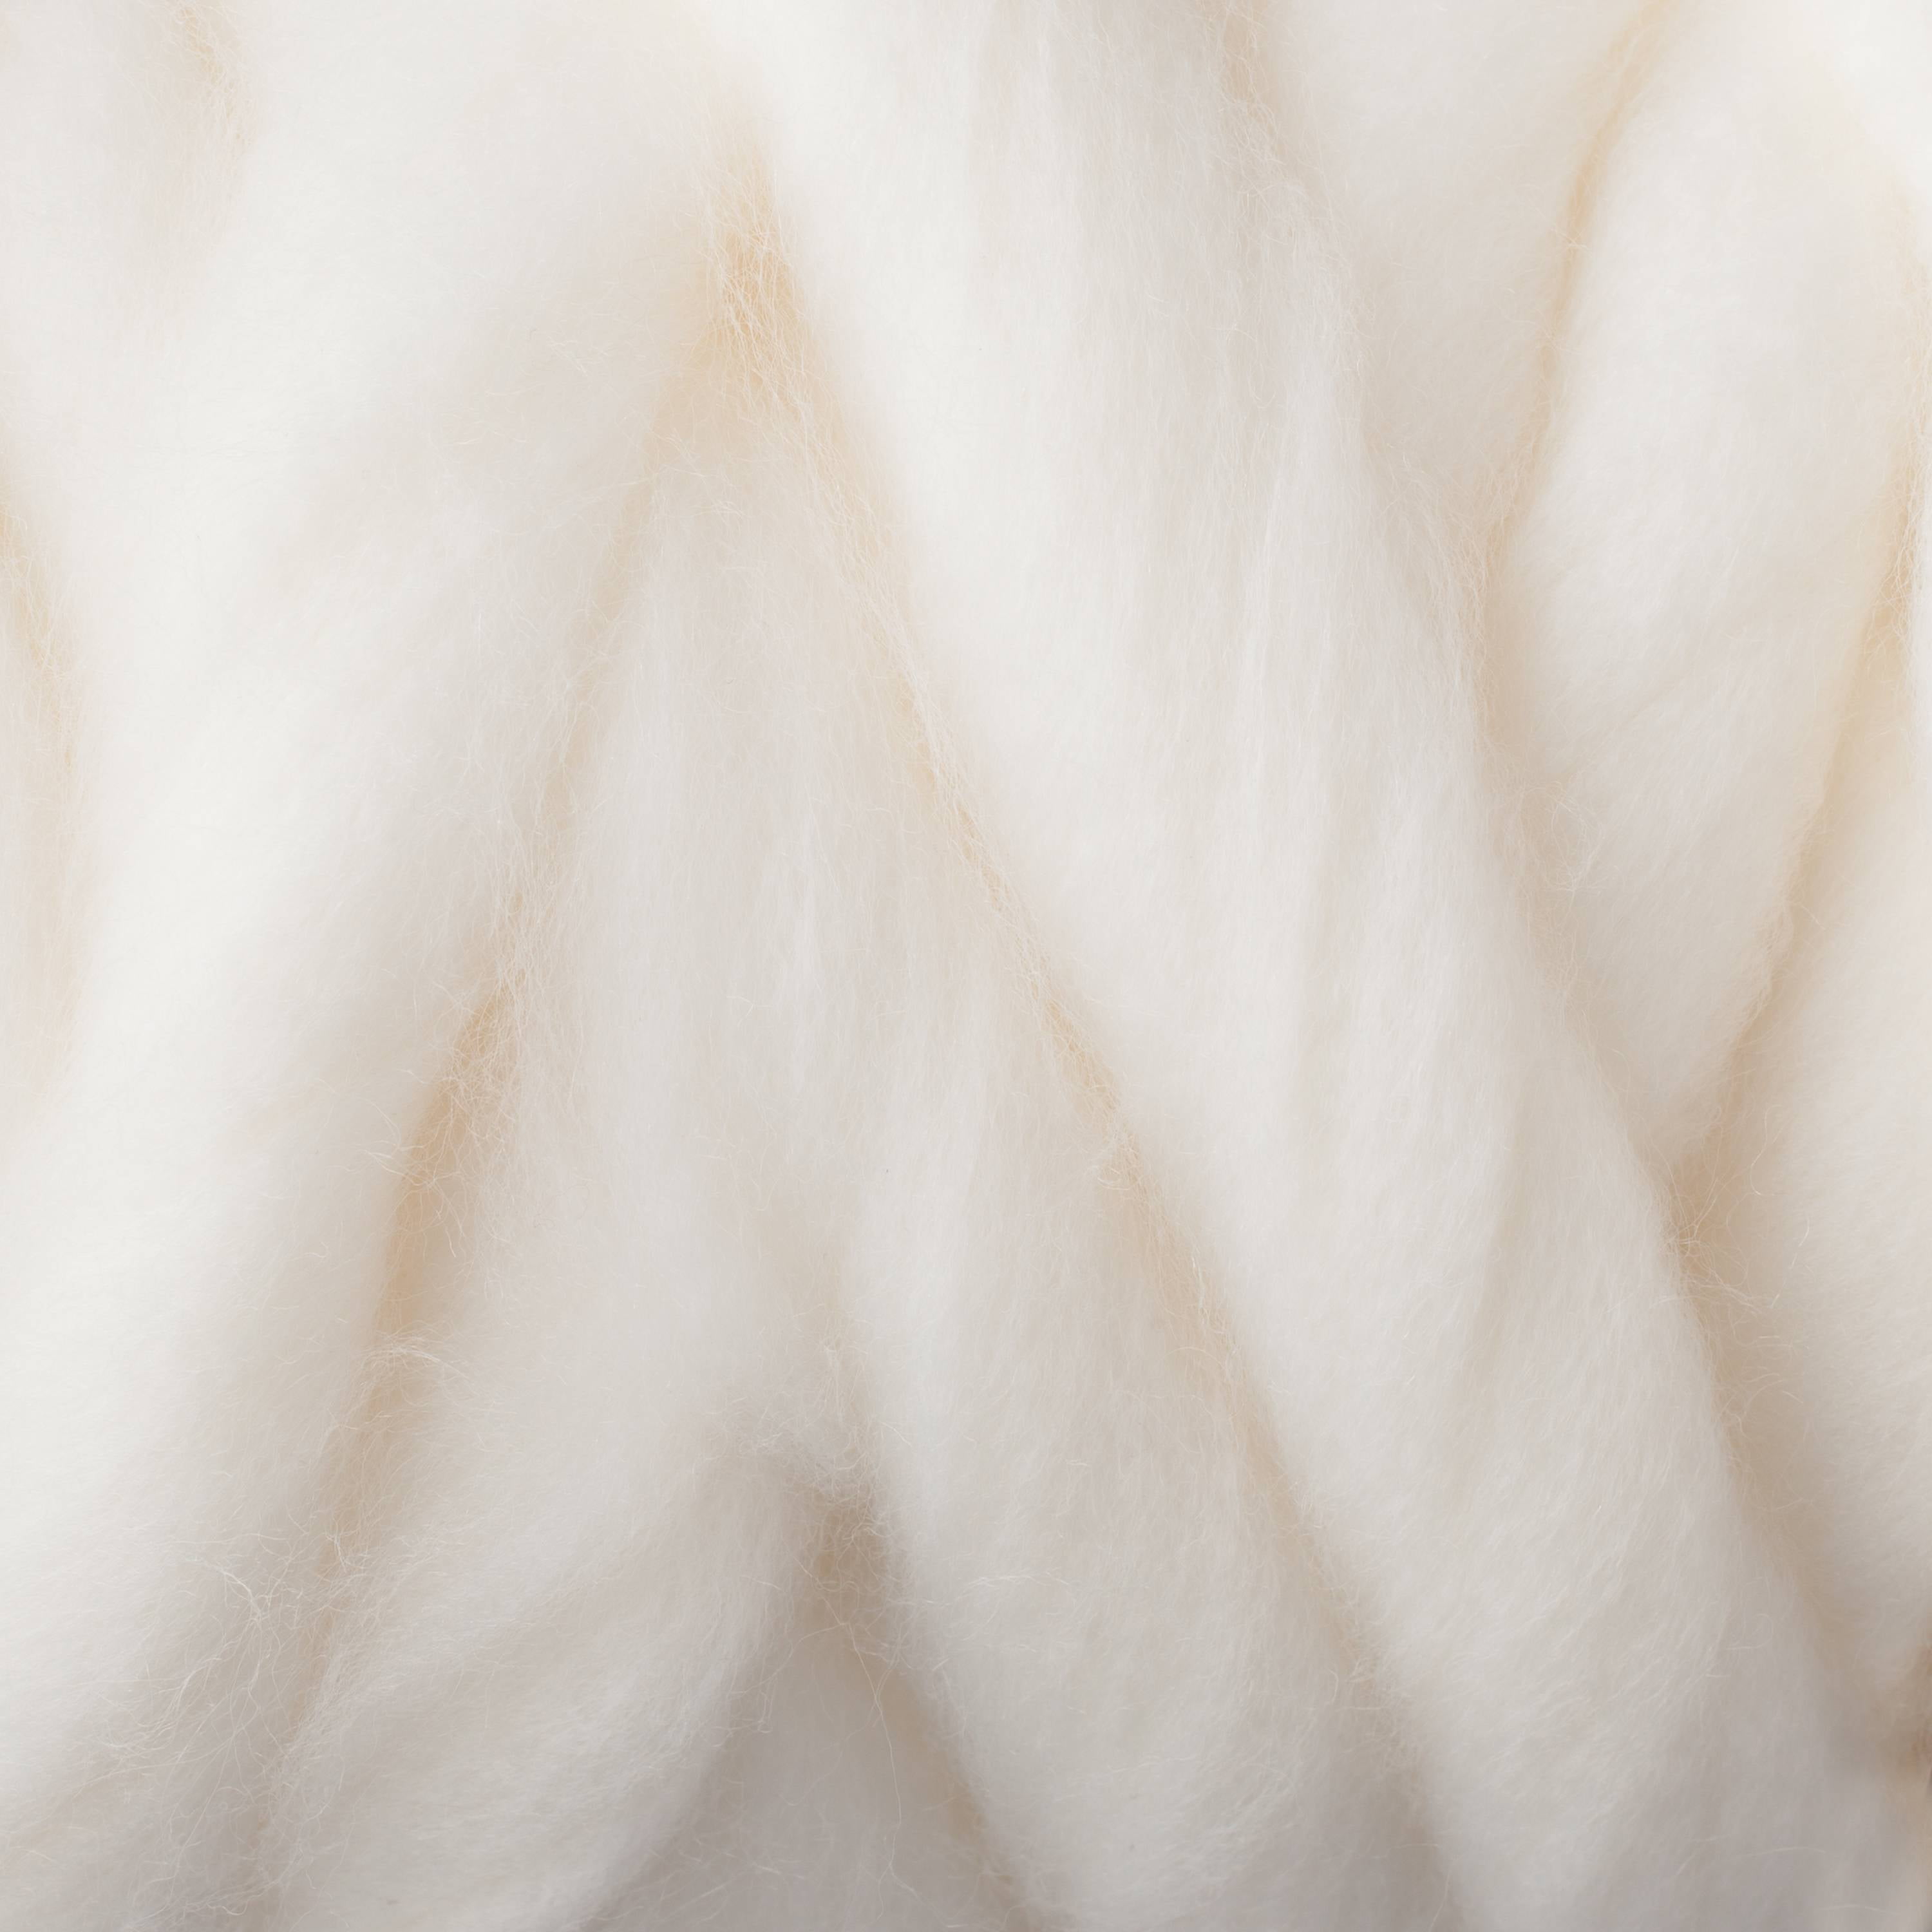 Mainstays Roving Yarn Value Bundle, 100% Acrylic, 26 yd, Soft Silver, Super  Bulky, Pack of 12